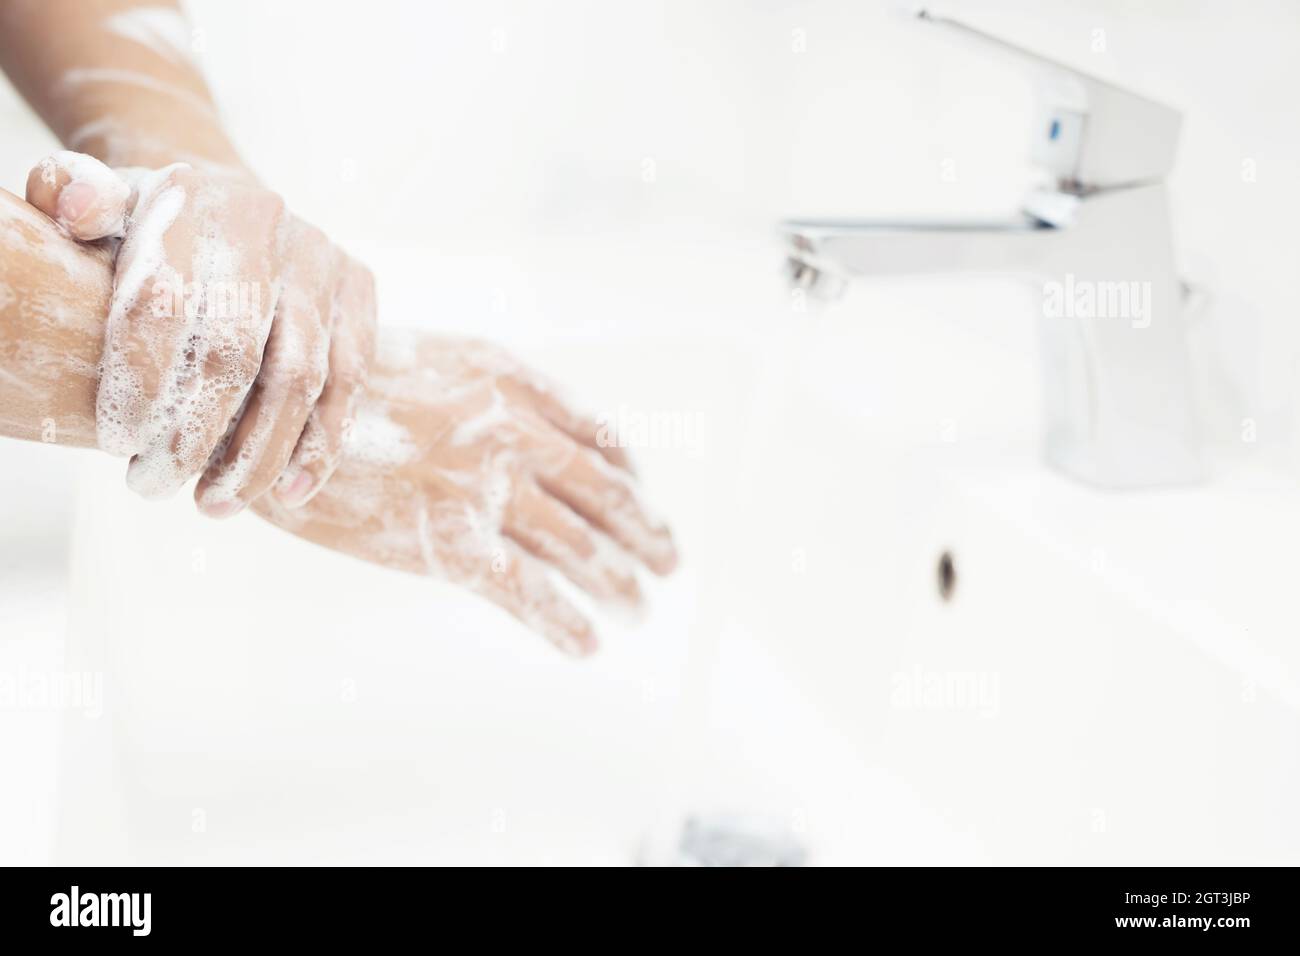 Men Are Washing Their Hands Before Eating Food Every Time To Prevent The Virus Stock Photo